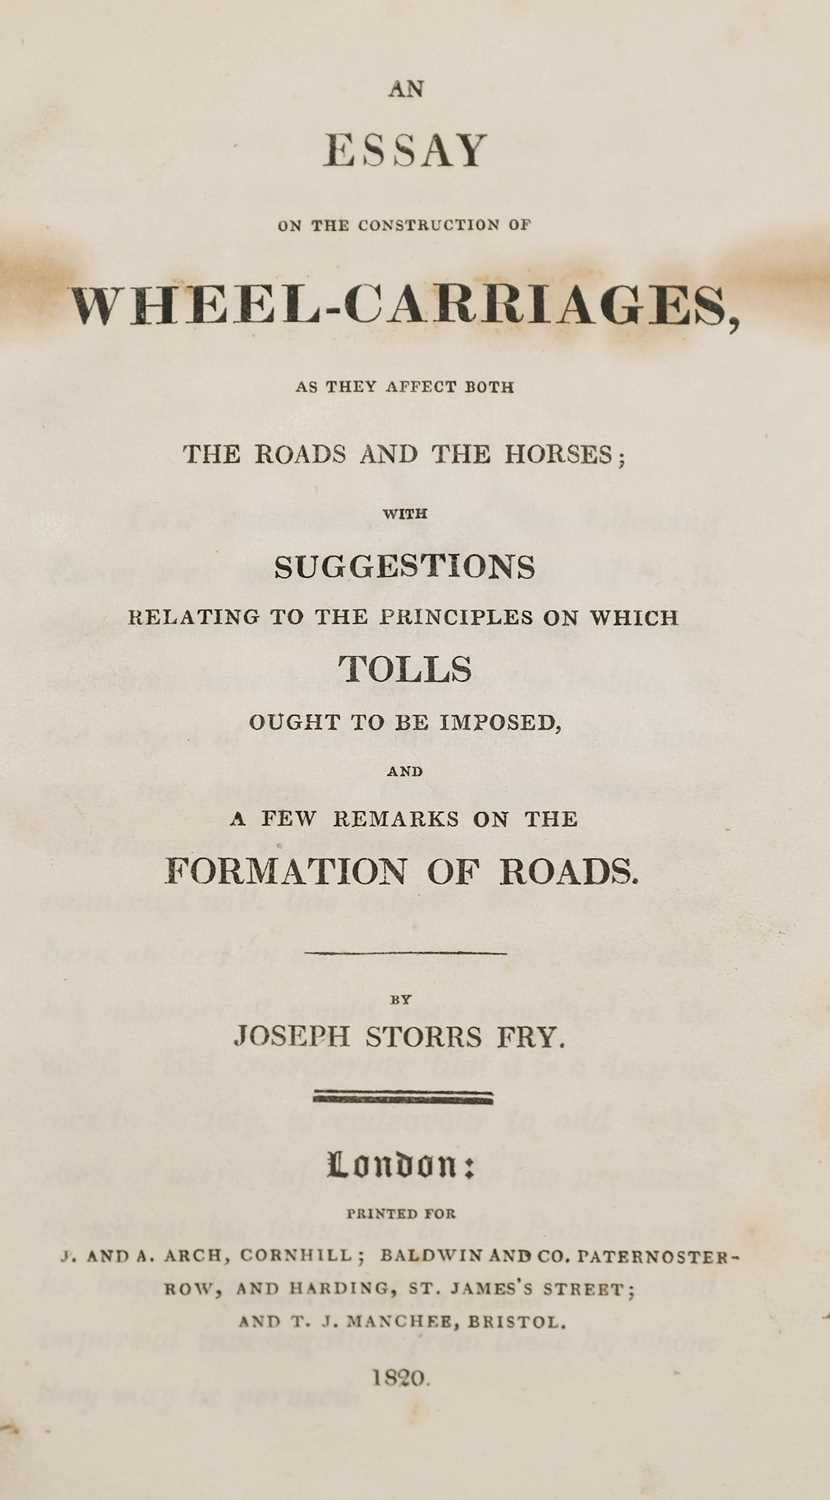 Lot 85 - Fry (Joseph Storrs). An Essay on the Construction of Wheel-Carriages..., 1820